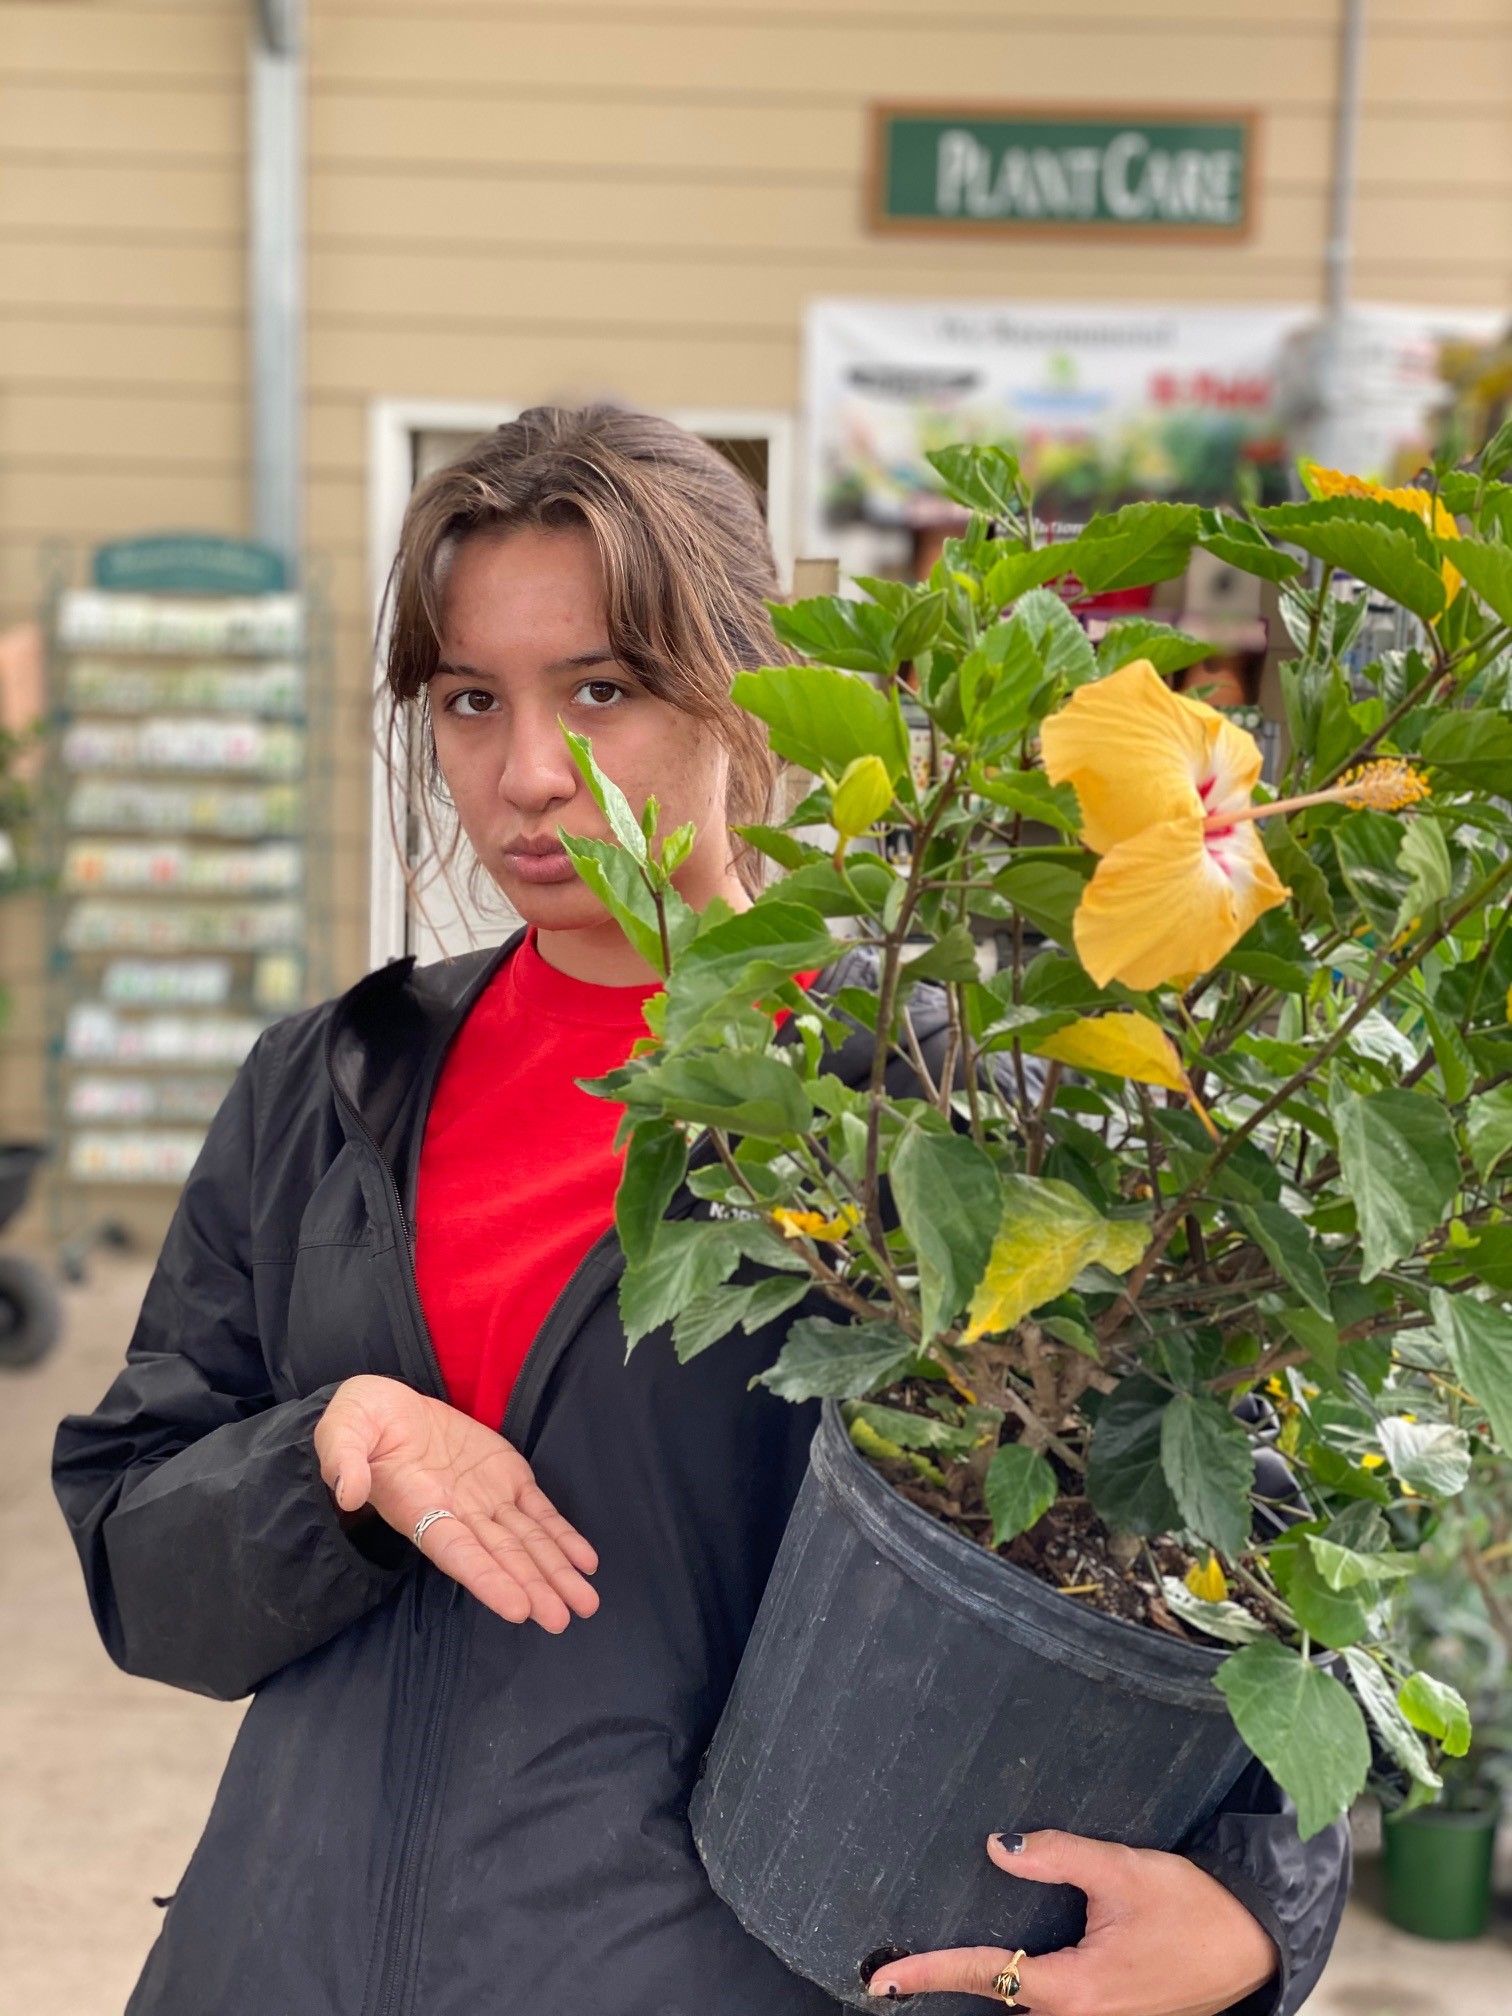 woman with a red shirt and black jacket carrying a yellow hibiscus in a black pot at garden center